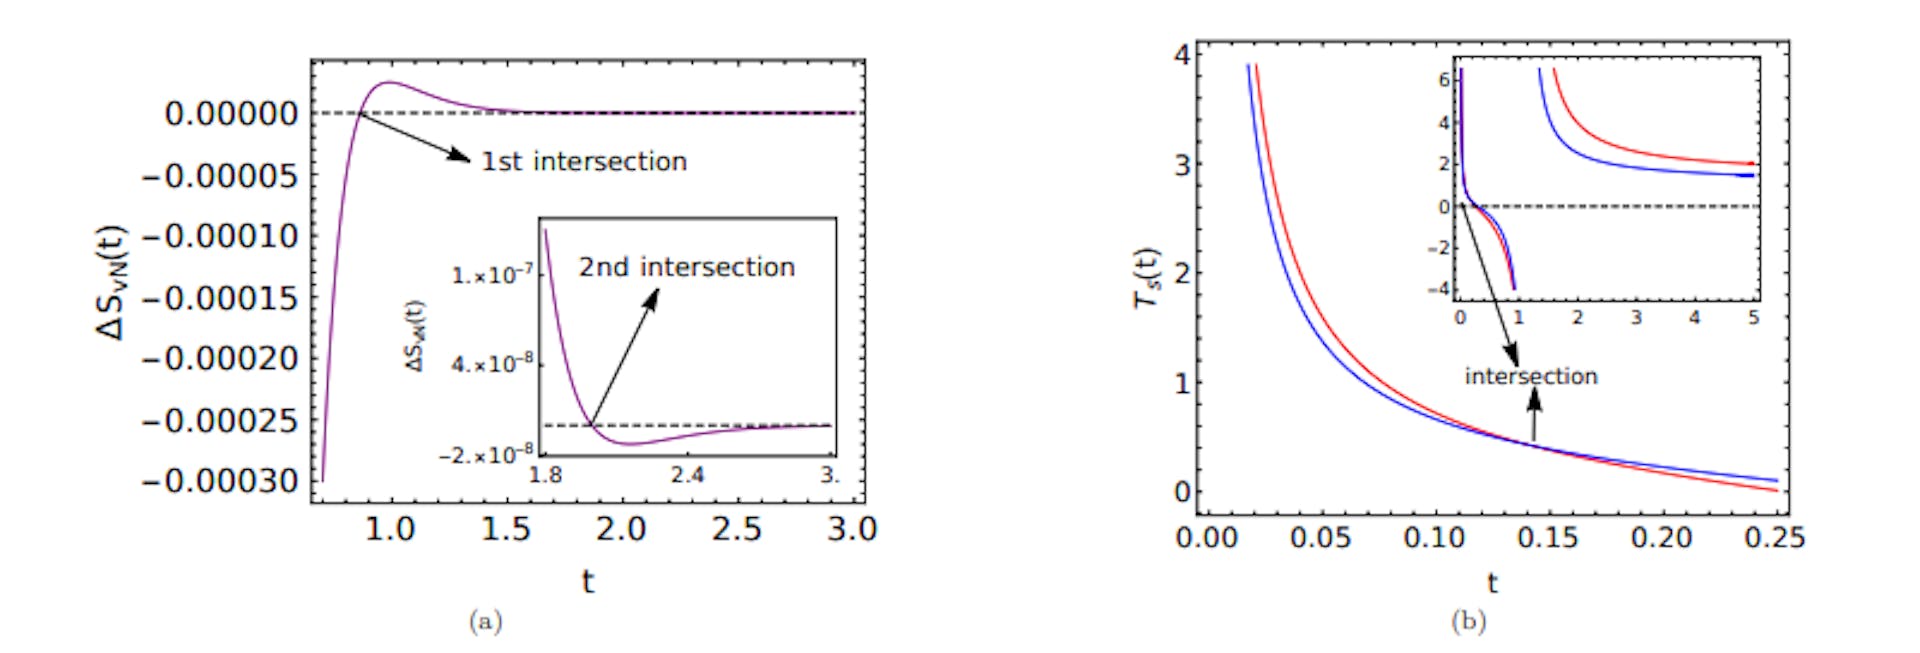 FIG. 17. The figure (a) illustrates QMPE in von Neumann entropy in region (e). The difference of entropies between two copies I and II intersect zero twice, leading to double QMPE. The inset shows the second intersection that is weaker in magnitude with respect to the first intersection shown in the main figure. Parameters used in figure (a) are same as in Fig. 16. The figure (b) illustrates an example of thermal QMPE where the intersection between initially hotter and colder copies occur after the initial stage of negative temperature. The inset of figure (b) shows the full time evolution including the initial negative temperatures. Parameters used are ˜d = 2√ 2, Γ = 6 ˜ √ 3, Γ˜I = 14.0, Γ˜II = 15.0, ˜dI = 6.0, ˜dII = 3.0.